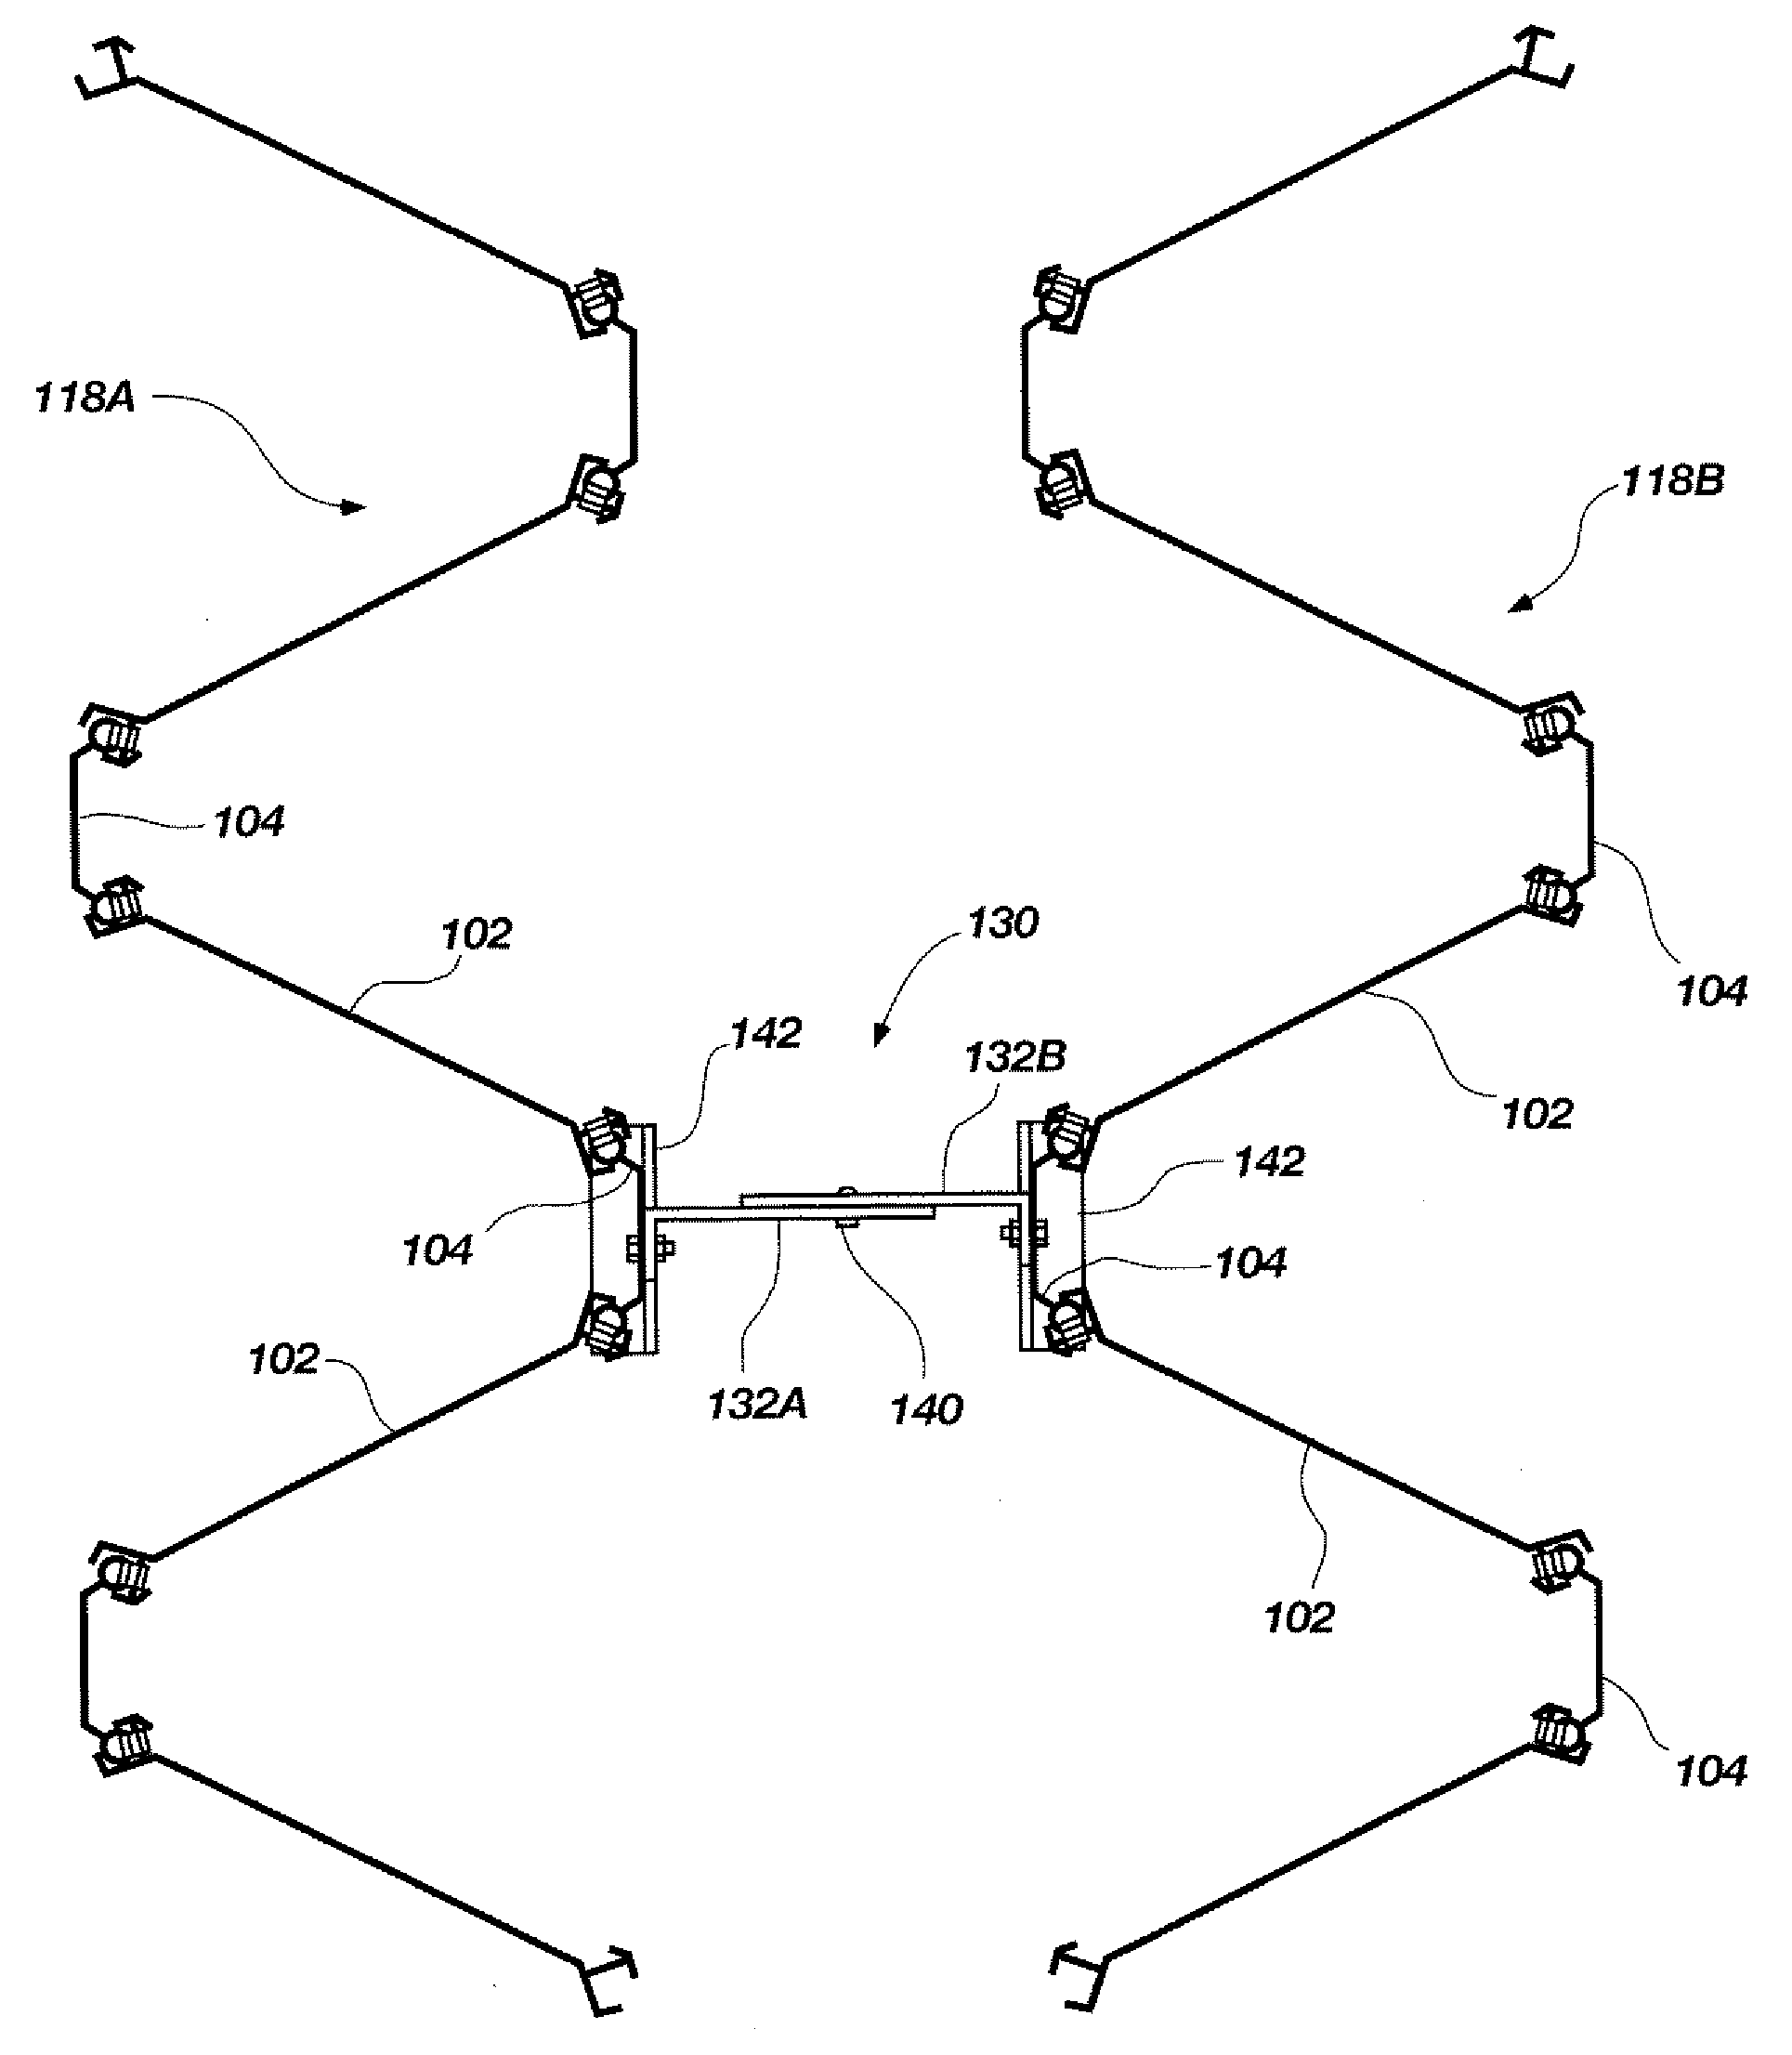 Movable partitions with lateral restraint devices and related methods